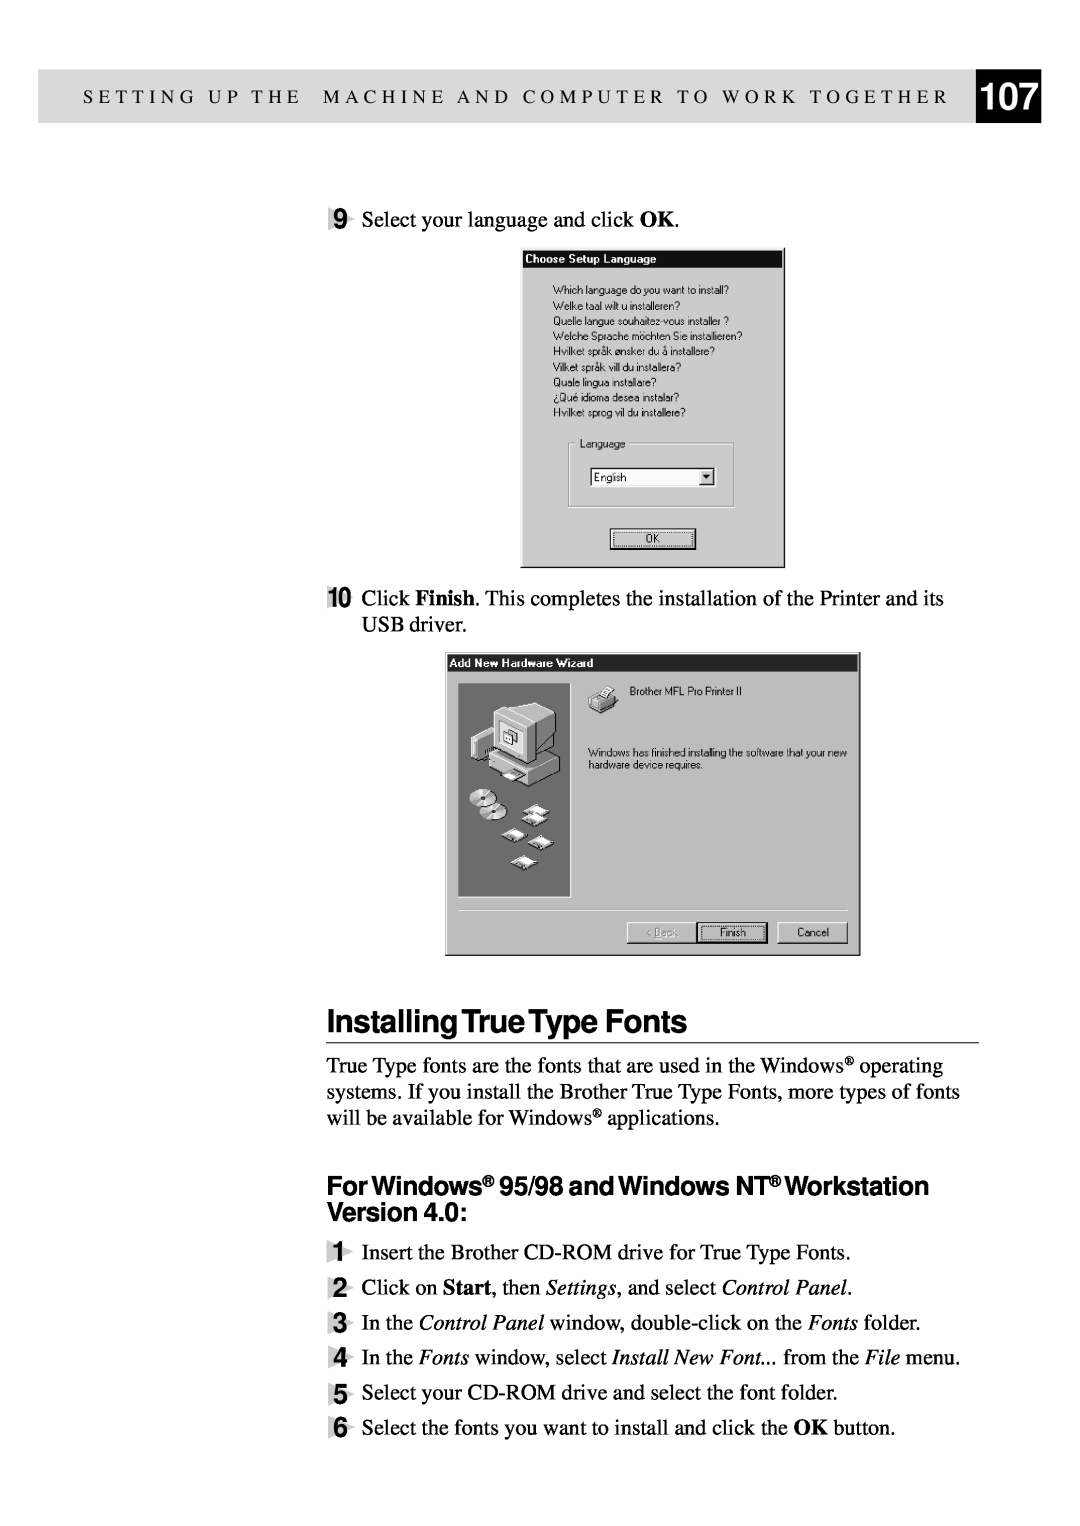 Brother MFC-9650, FAX-8350P owner manual Installing True Type Fonts, For Windows 95/98 and Windows NT Workstation Version 